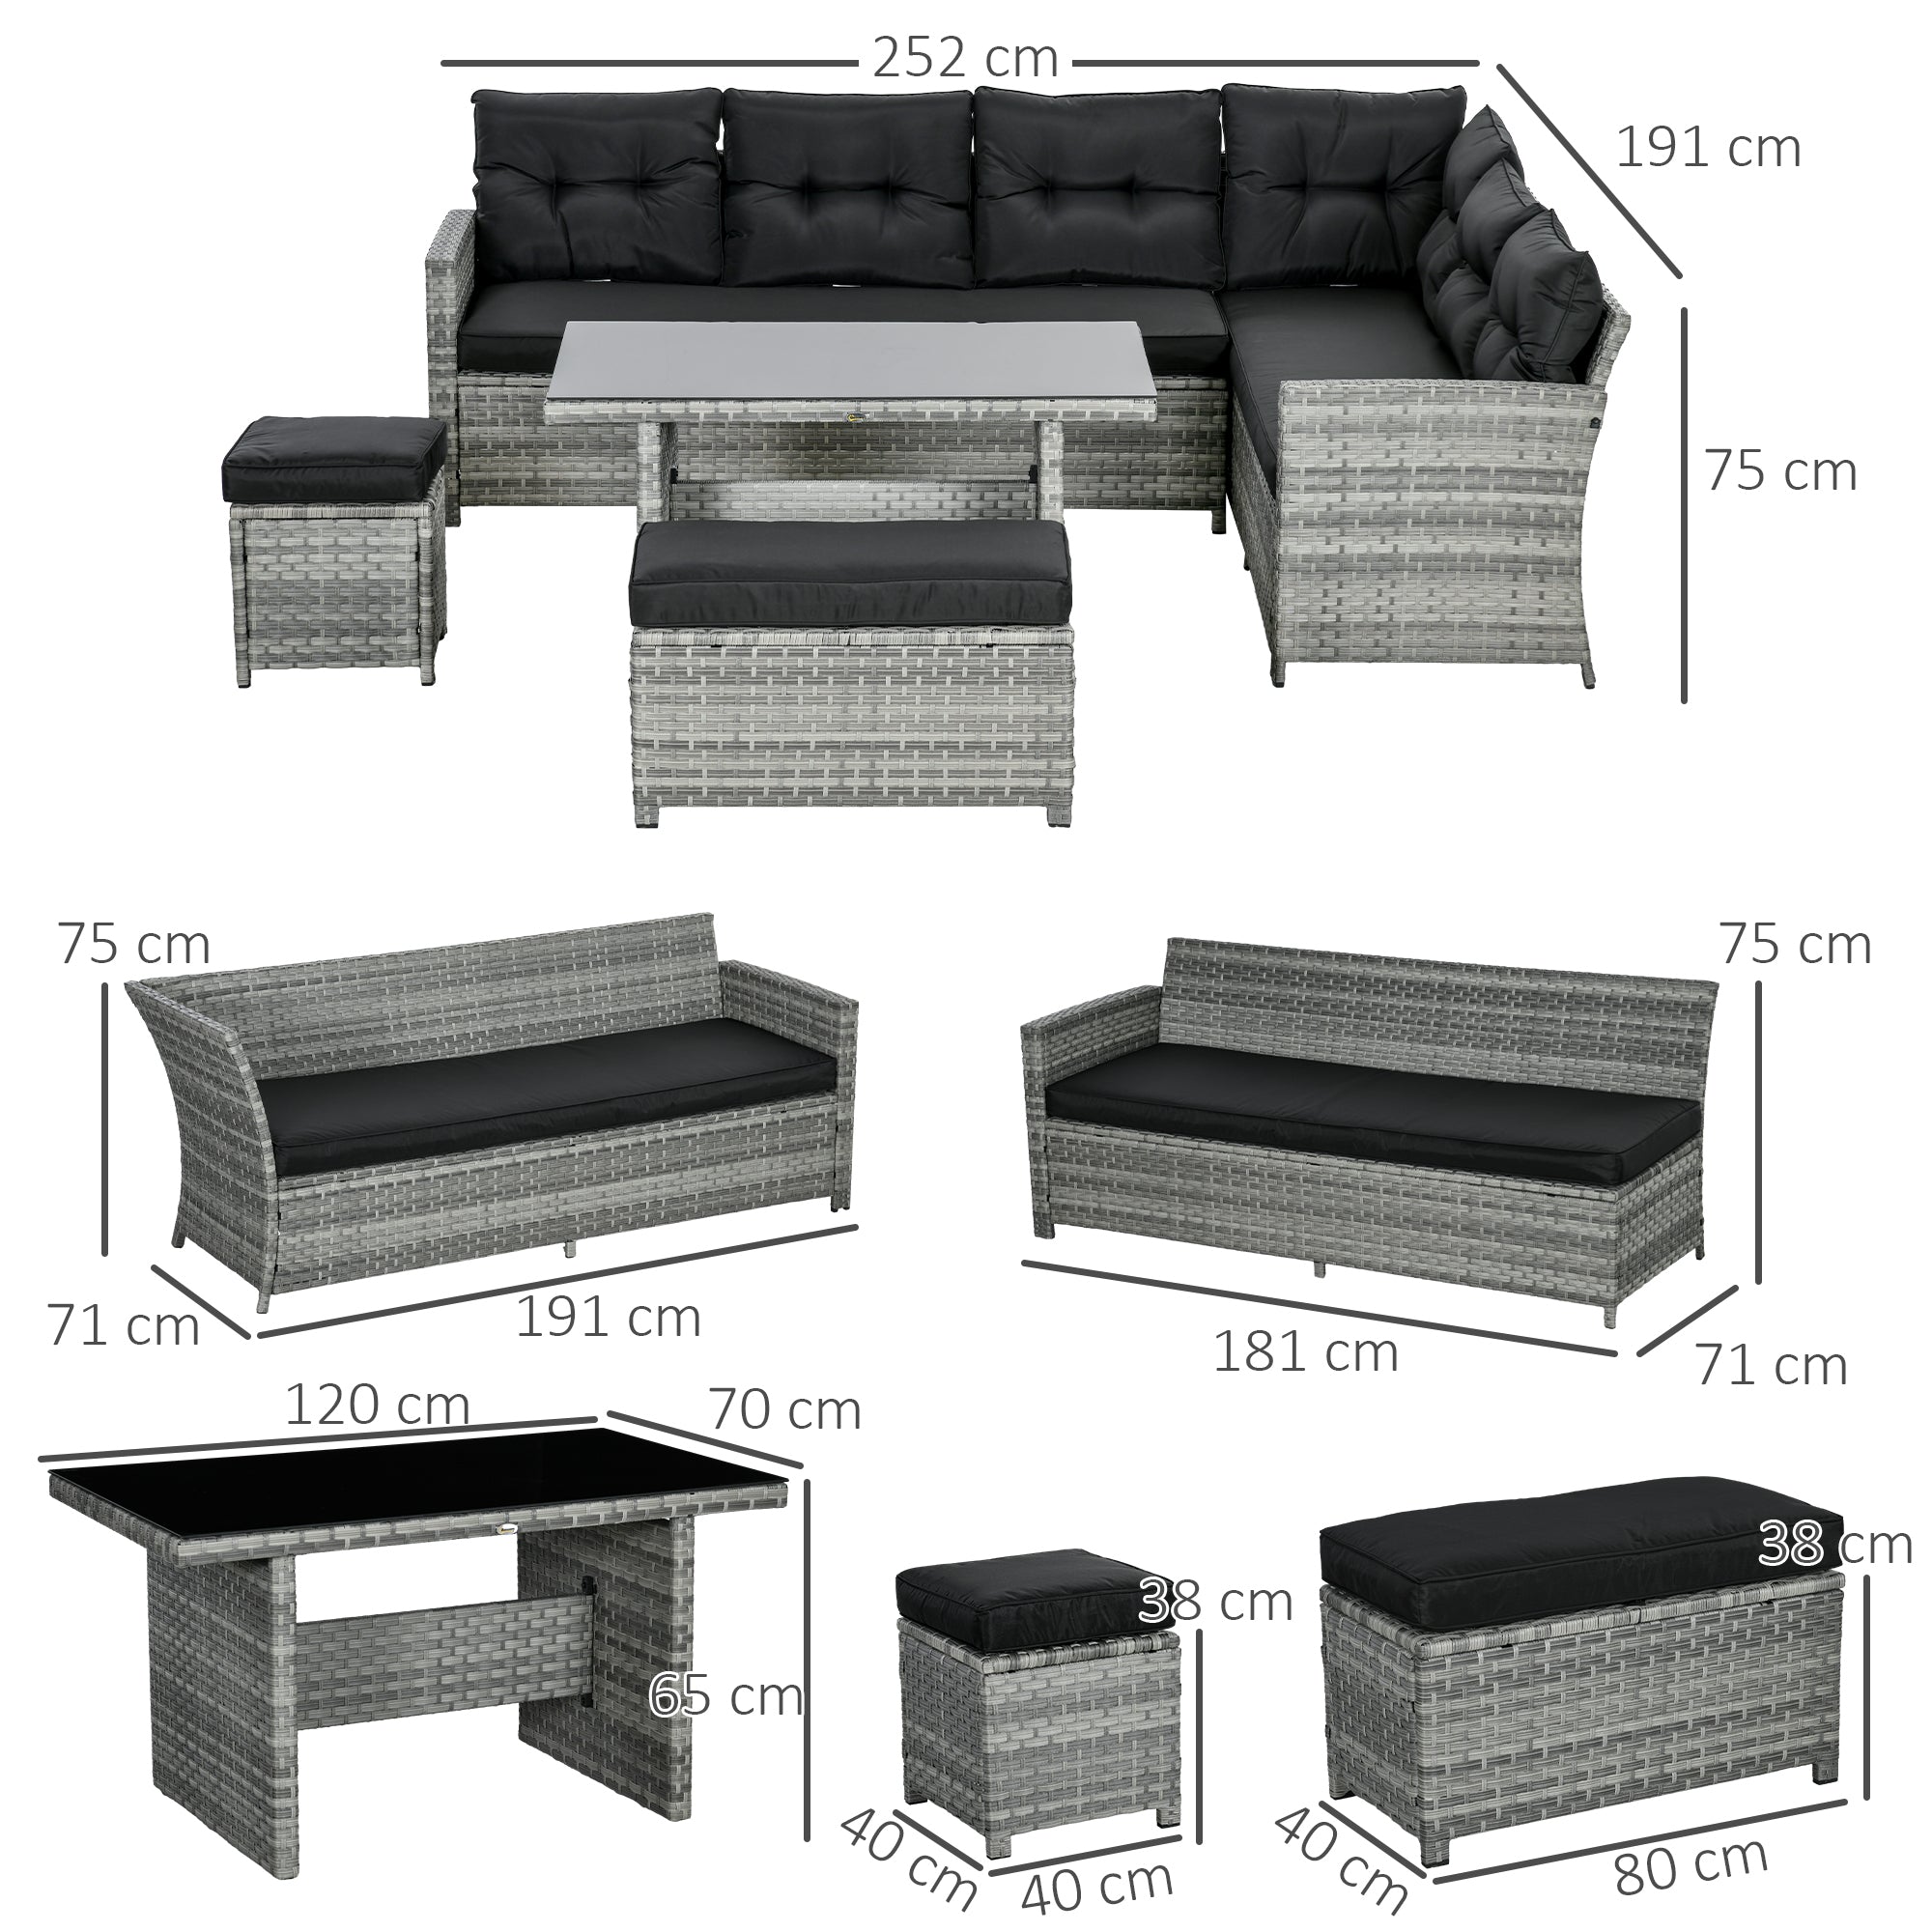 5-Piece Rattan Patio Furniture Set with Corner Sofa, Footstools, Glass Coffee Table, Cushions, Mixed Grey-2